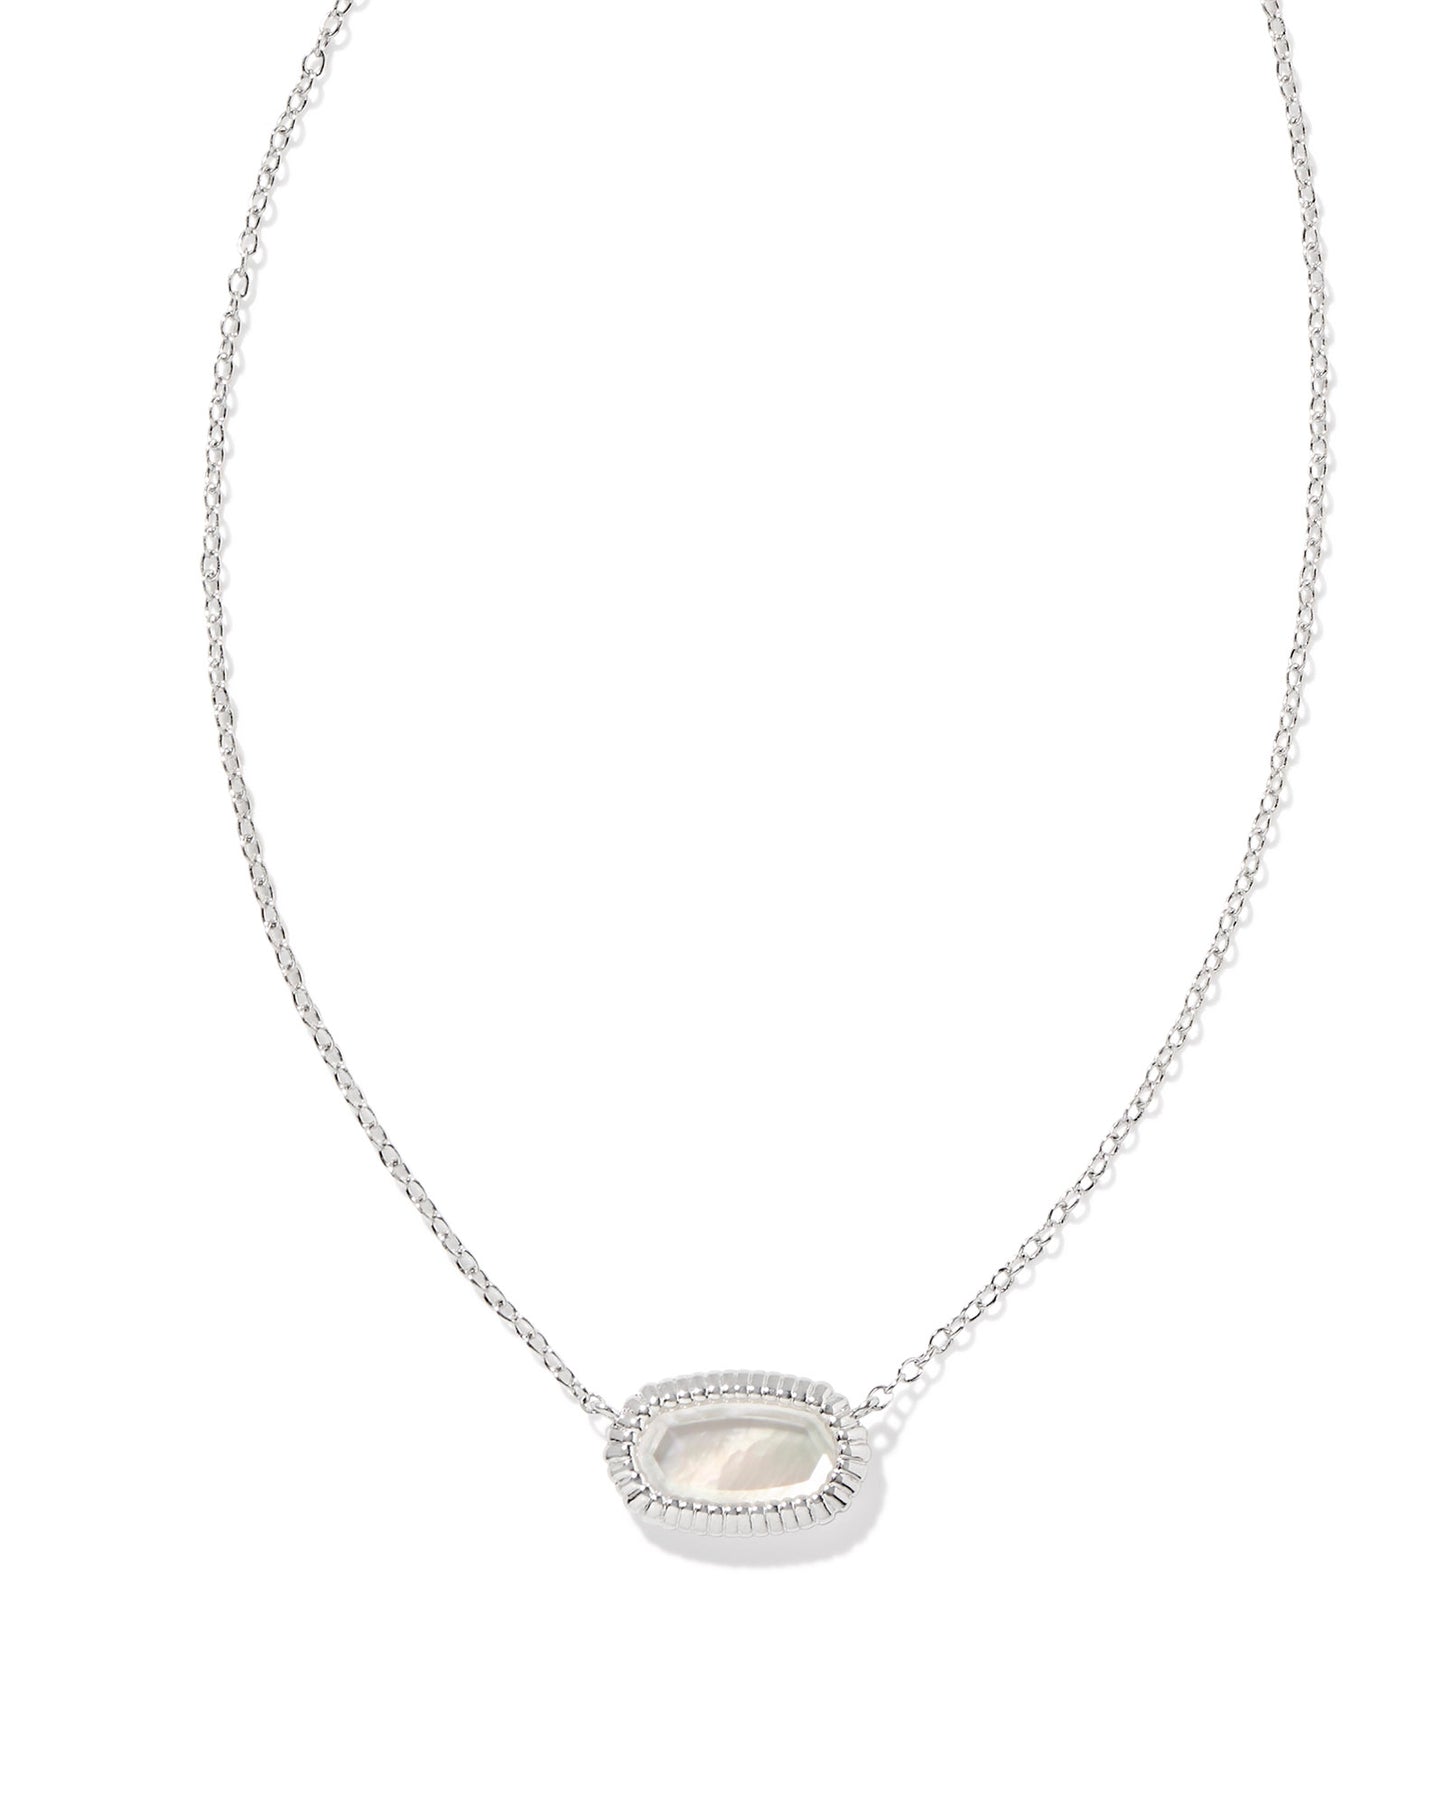 KENDRA SCOTT ELISA NECKLACE SILVER IVORY MOTHER OF PEARL